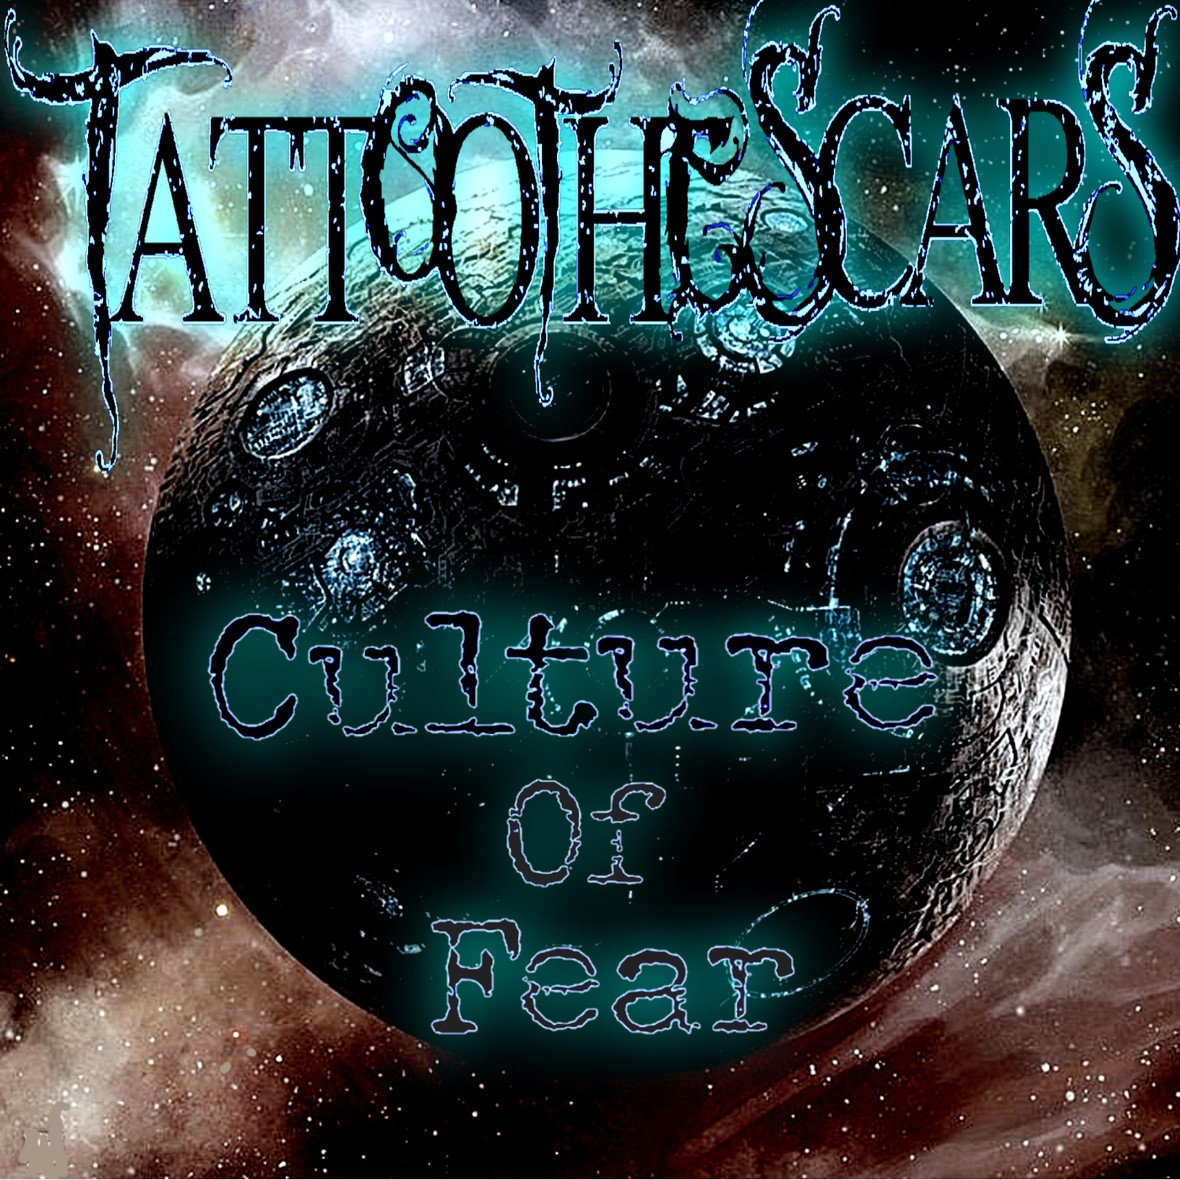 From the Green Room interview with Billy Grey of Tattoo the Scars